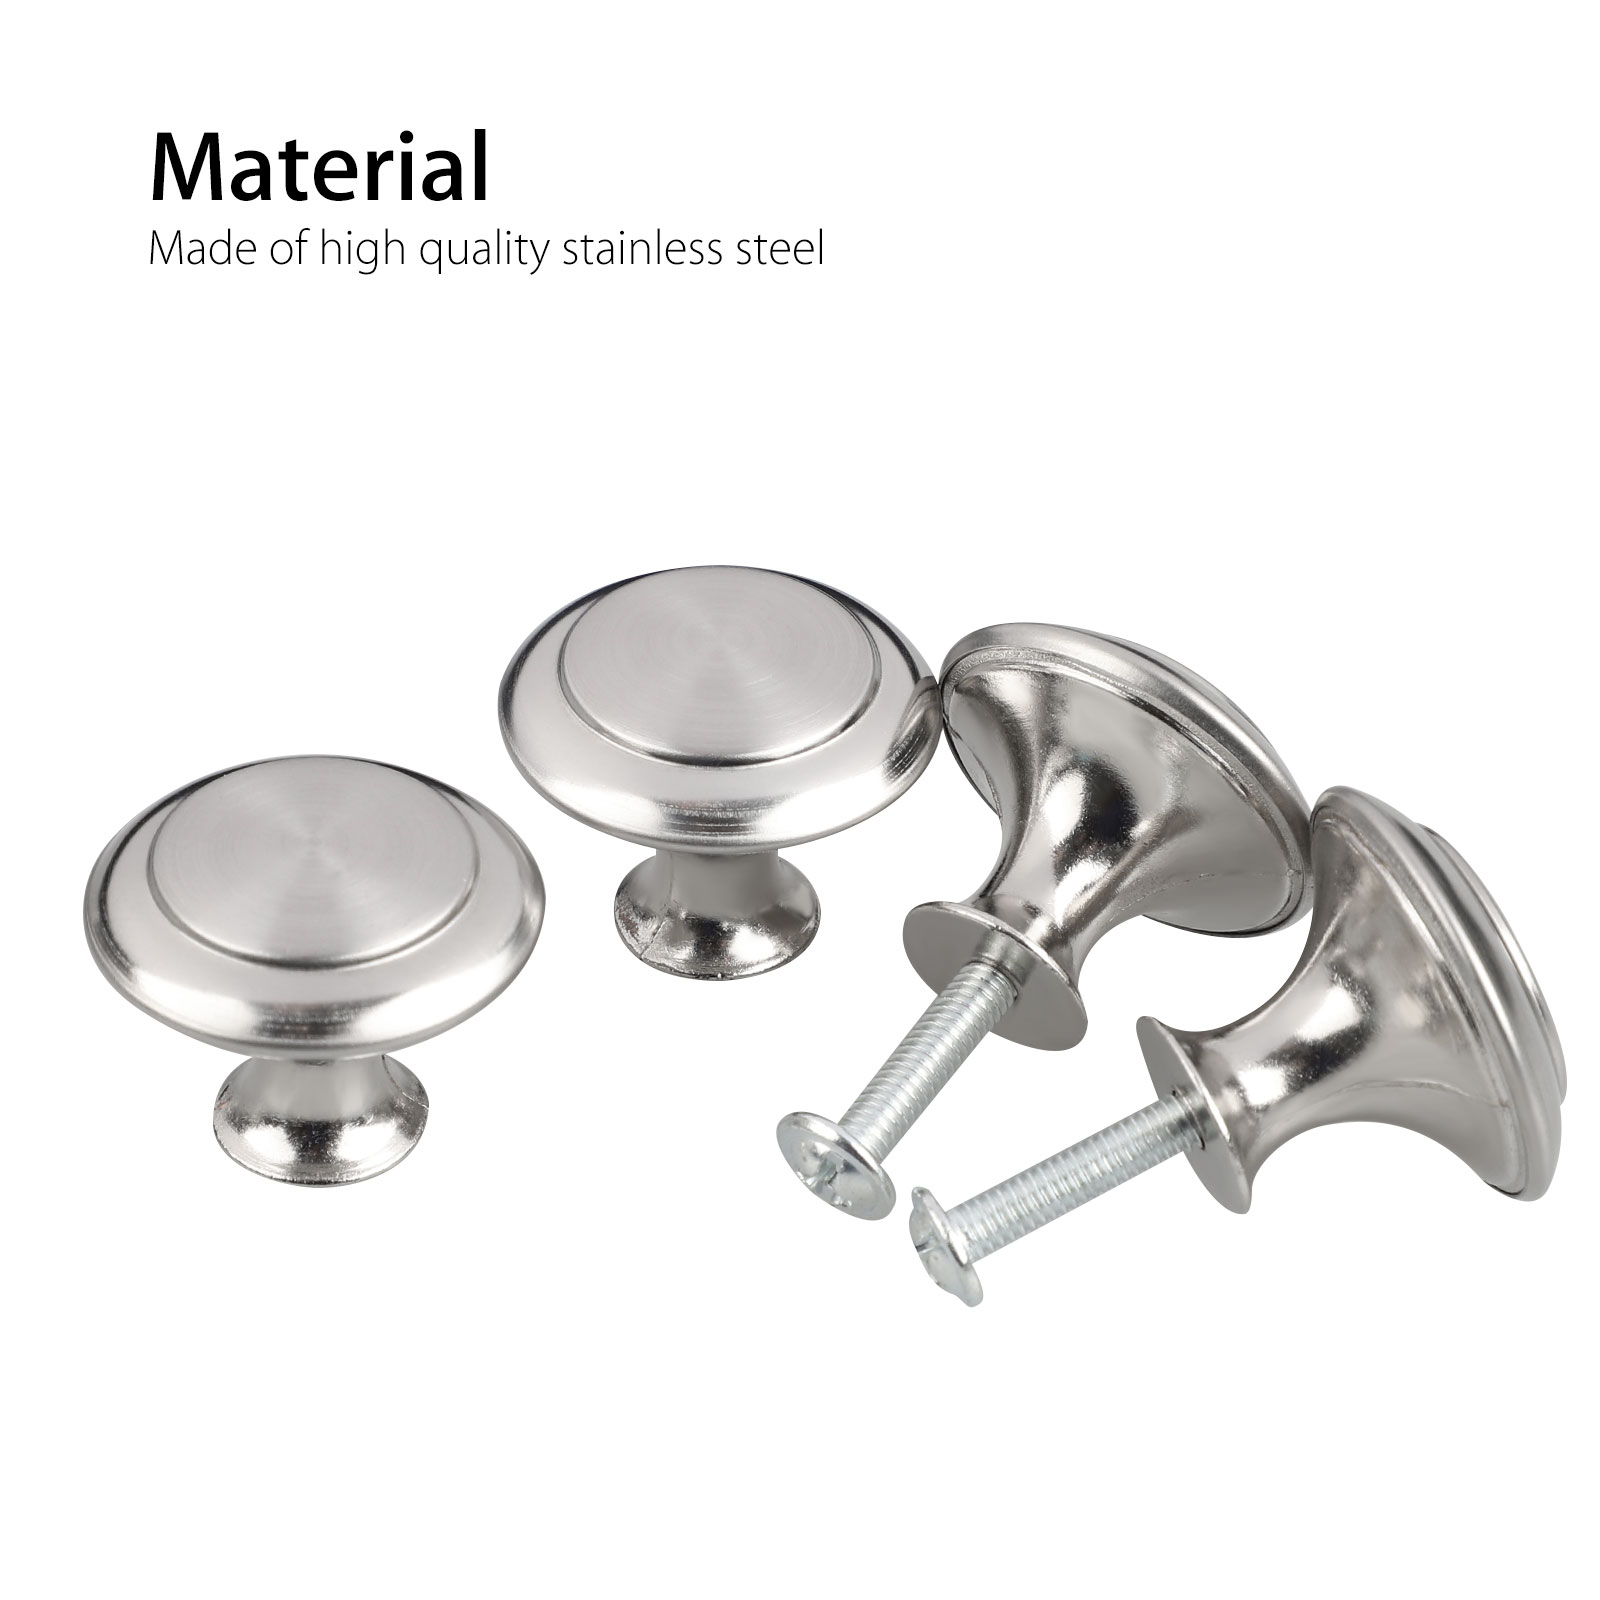 40/20pcs Kitchen Cabinet Heavy Pull Knobs, EEEkit Brushed Nickel Cabinet Knobs Cupboard Door Knobs Kitchen Hardware Round Pull Knobs for Bathroom Drawer, Silver - image 3 of 9